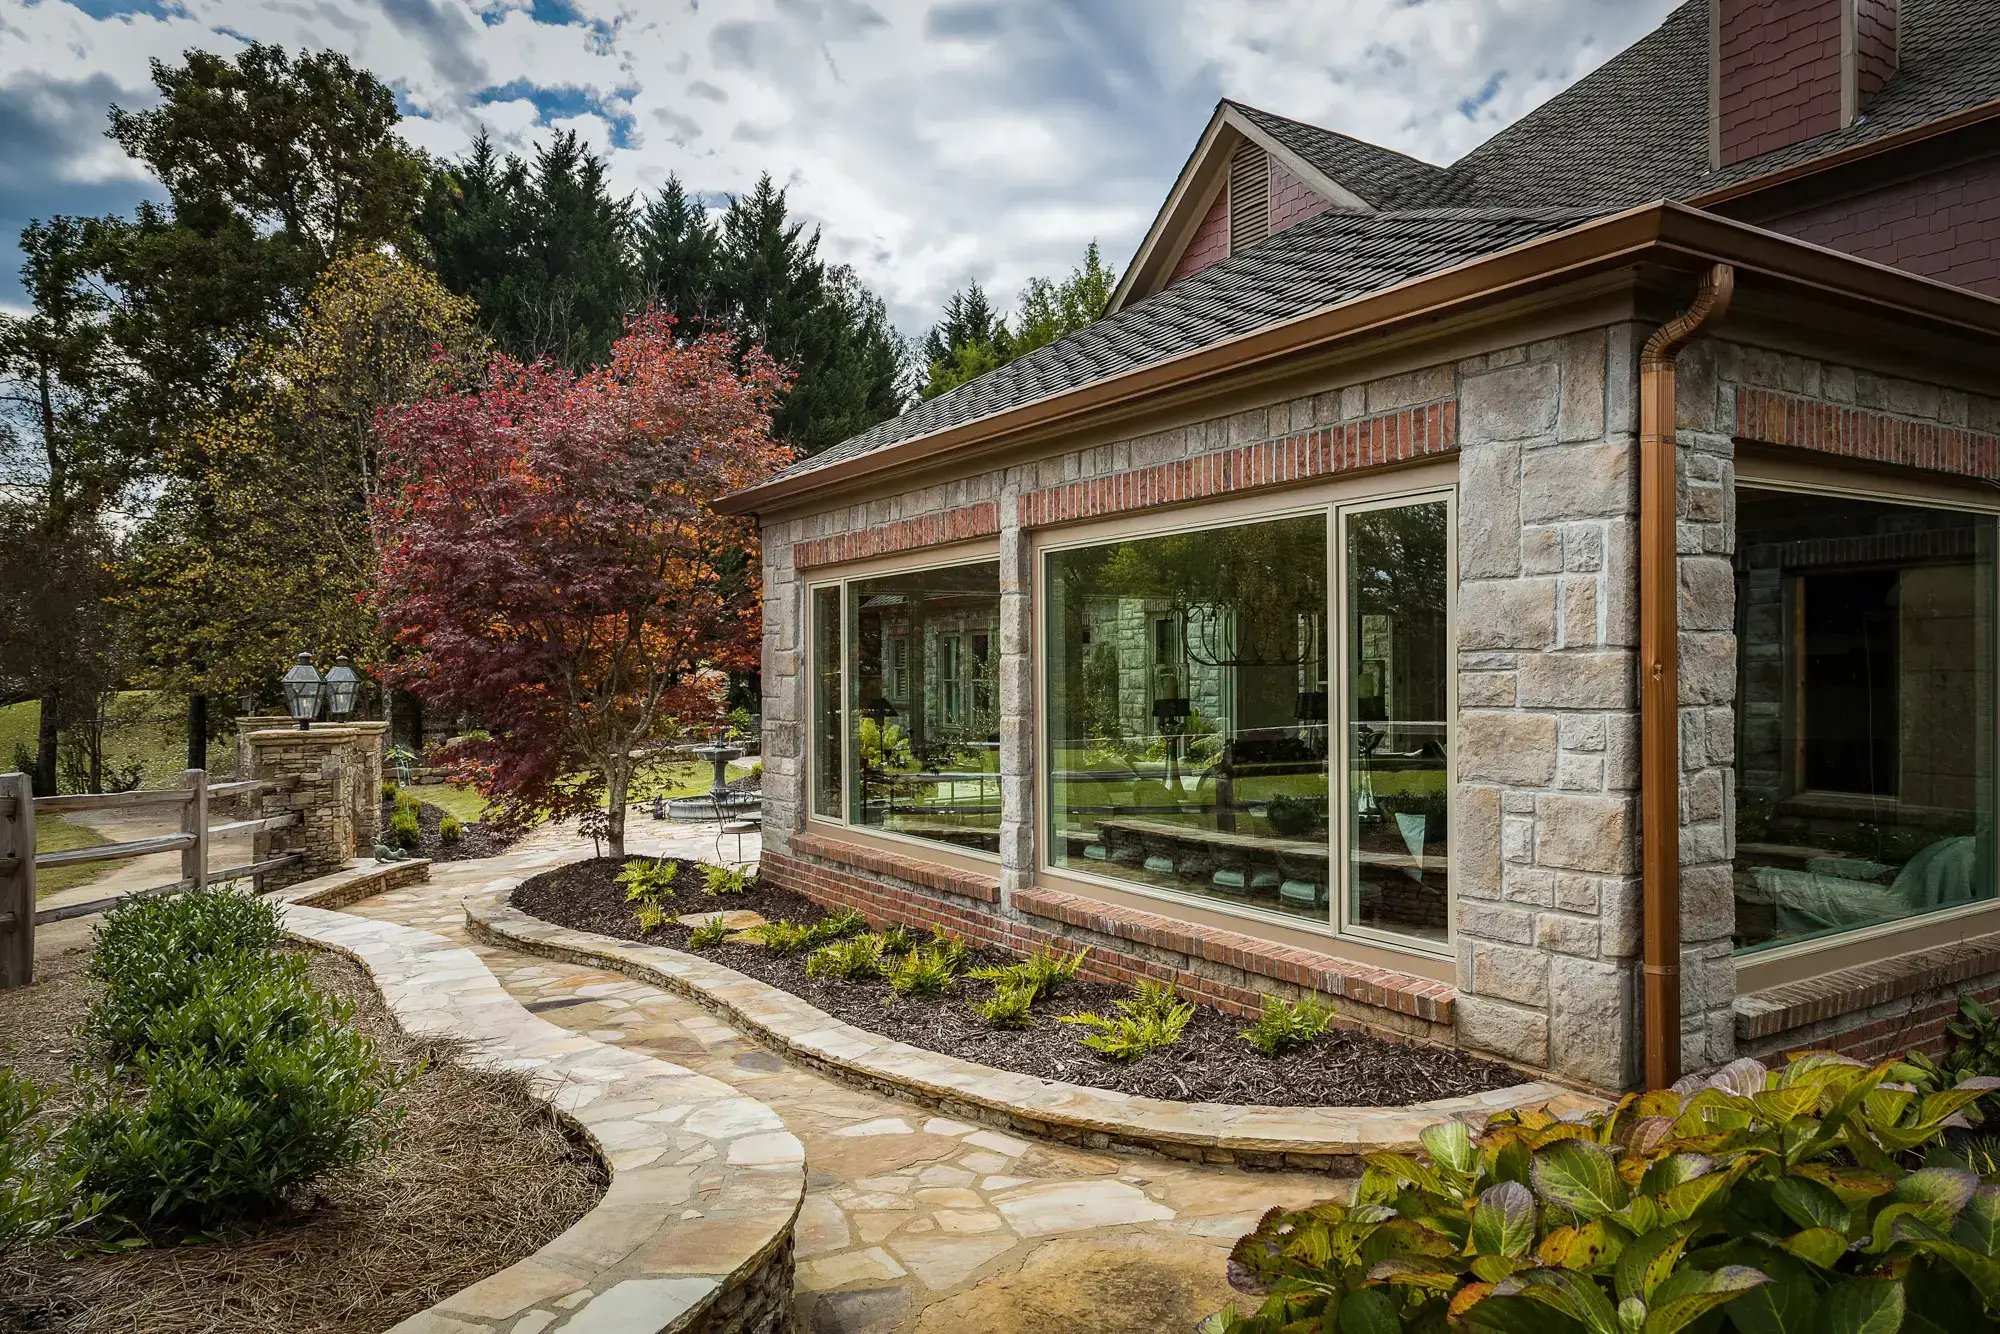 Landscaped garden path leading to a sunroom with large windows and stone accents.